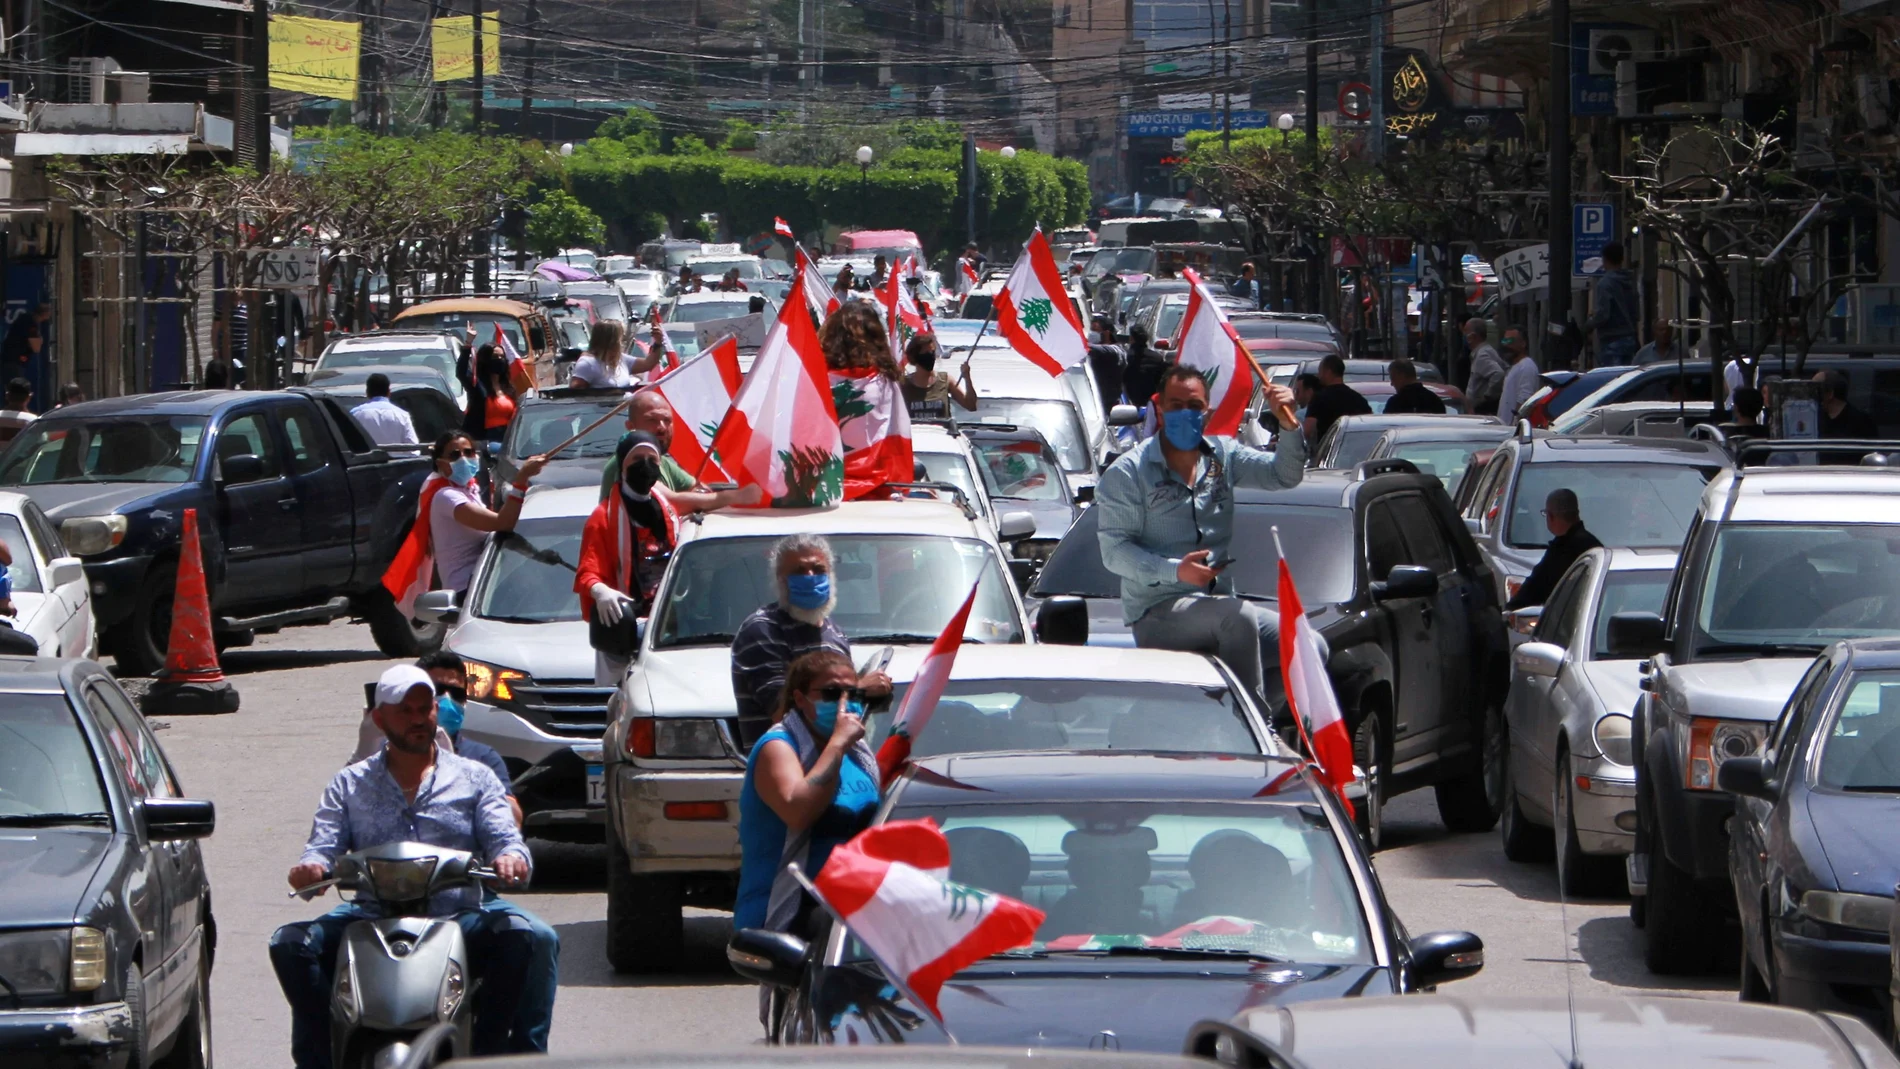 Anti-government demonstrators hold Lebanese flags during a protest in their cars, amid a countrywide lockdown to combat the spread of the coronavirus disease (COVID-19), in Tripoli